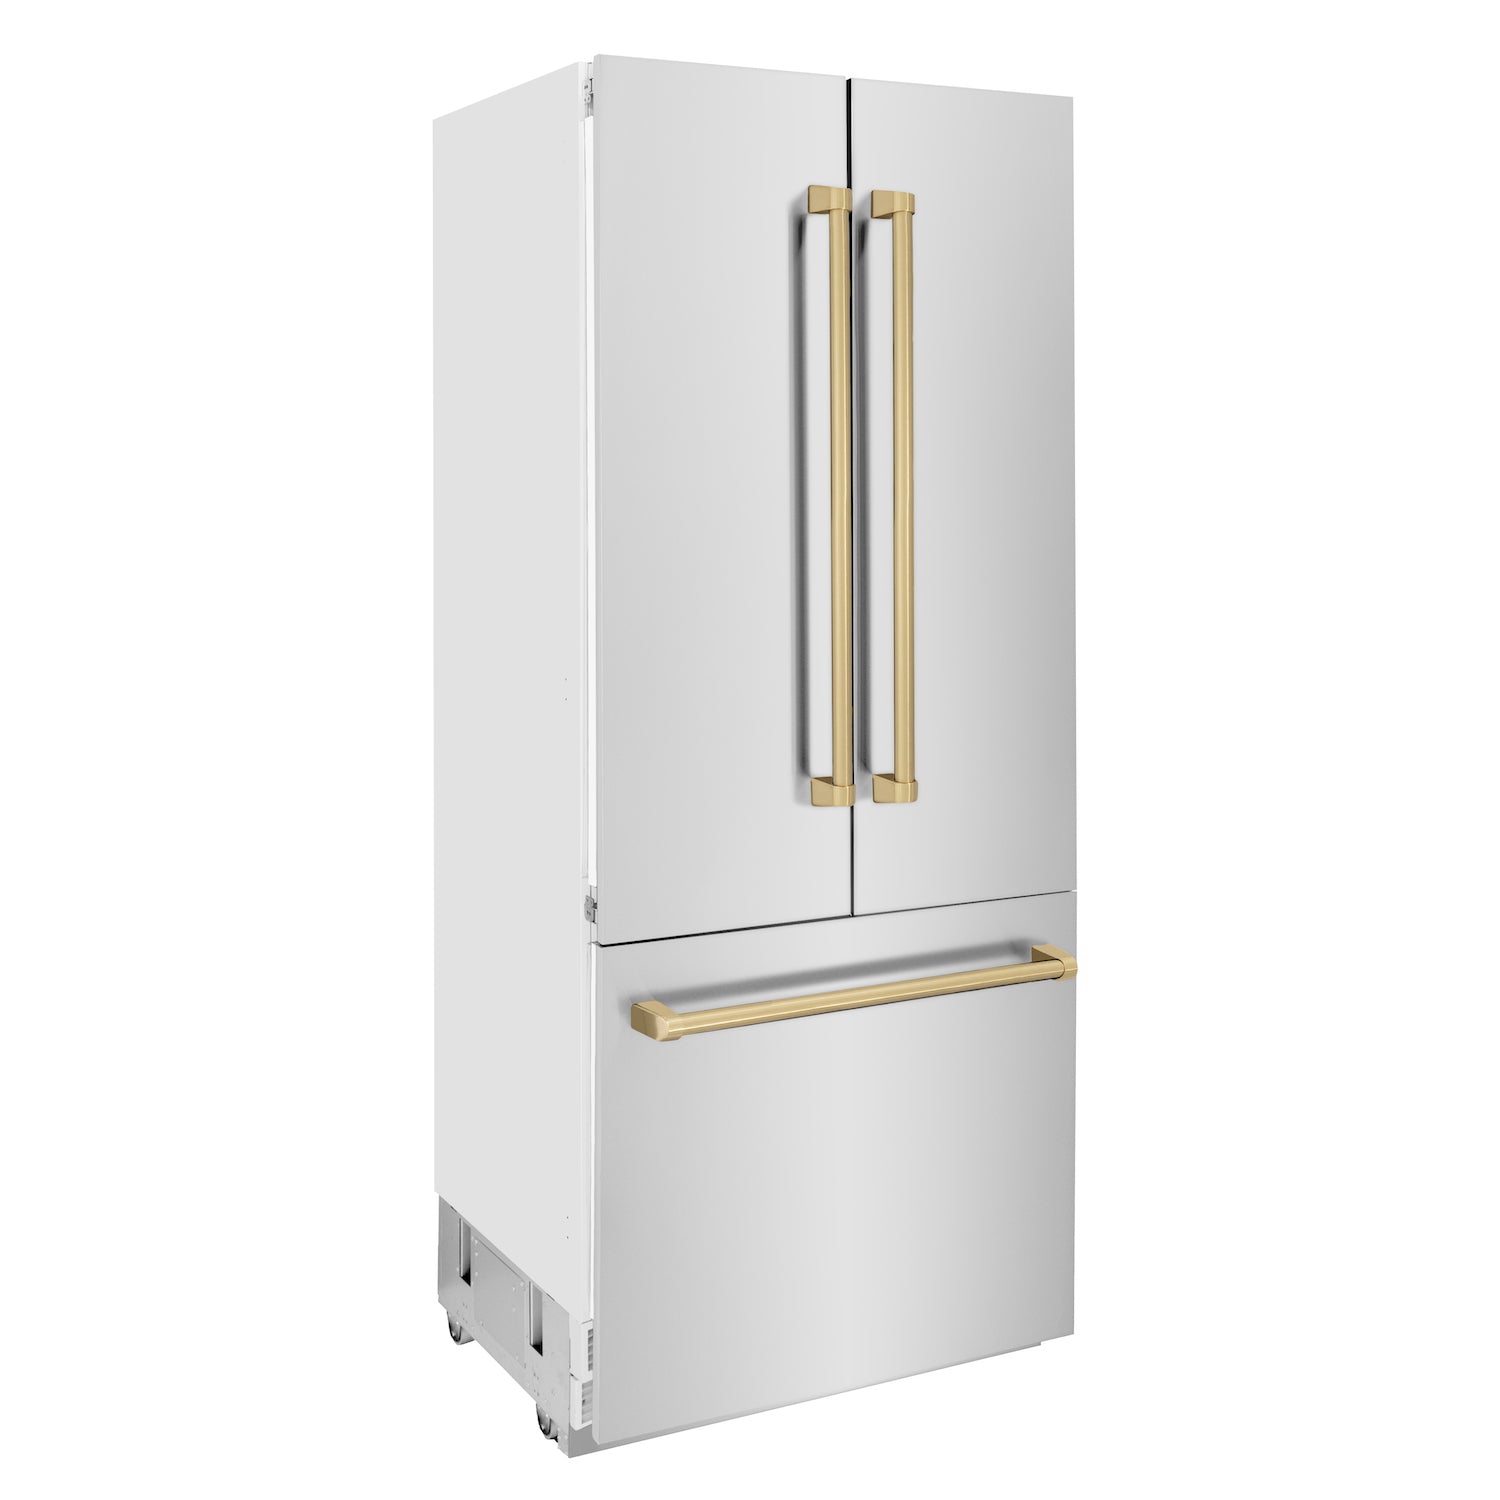 ZLINE Autograph Edition 36 in. 19.6 cu. ft. Built-in 2-Door Bottom Freezer Refrigerator with Internal Water and Ice Dispenser in Stainless Steel with Champagne Bronze Accents (RBIVZ-304-36-CB) side, closed.